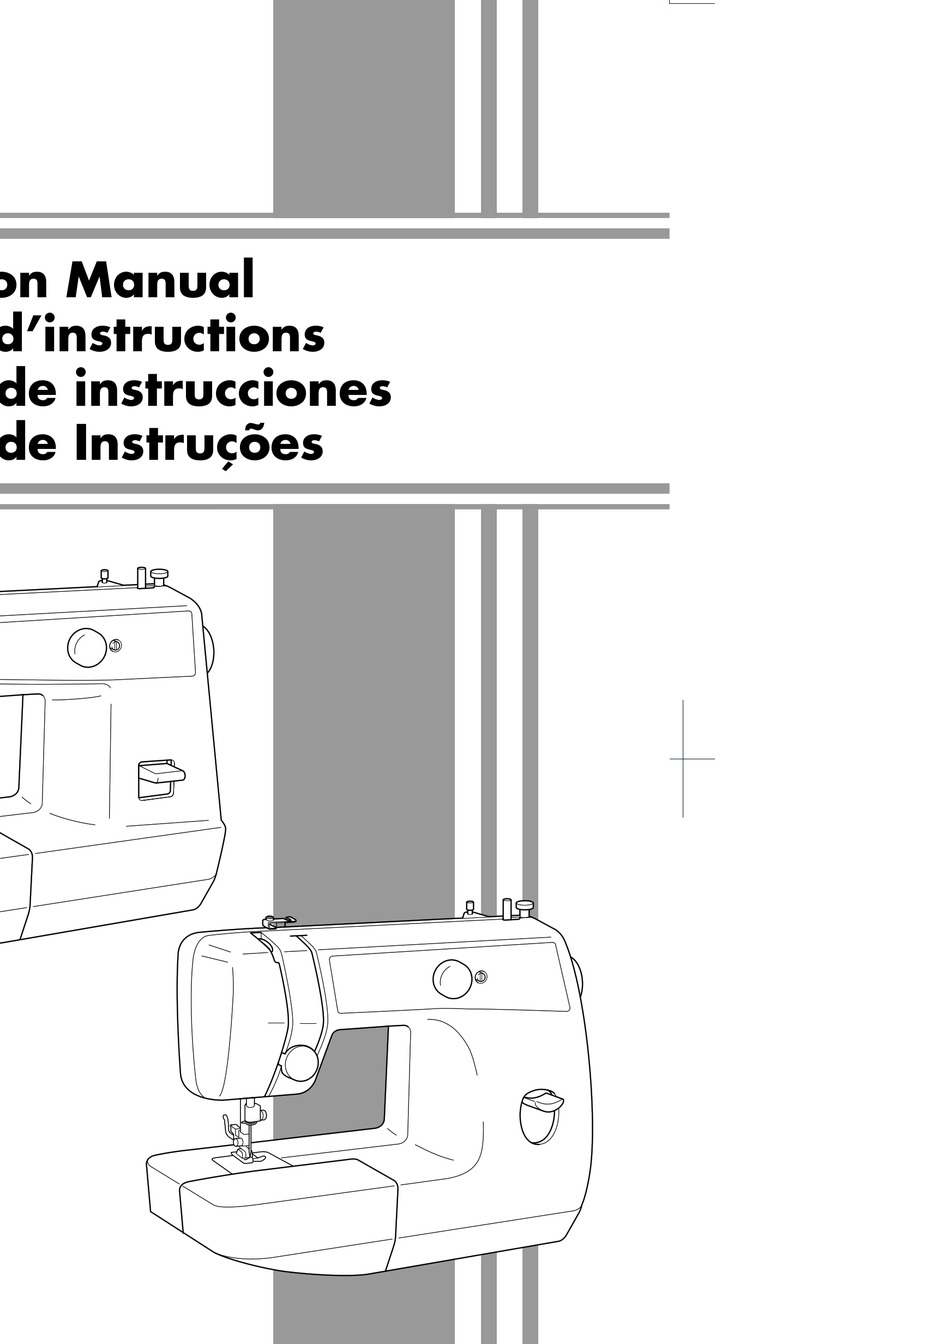 FREE Digital Manuals for Brother LS2125i - 1000's of Parts